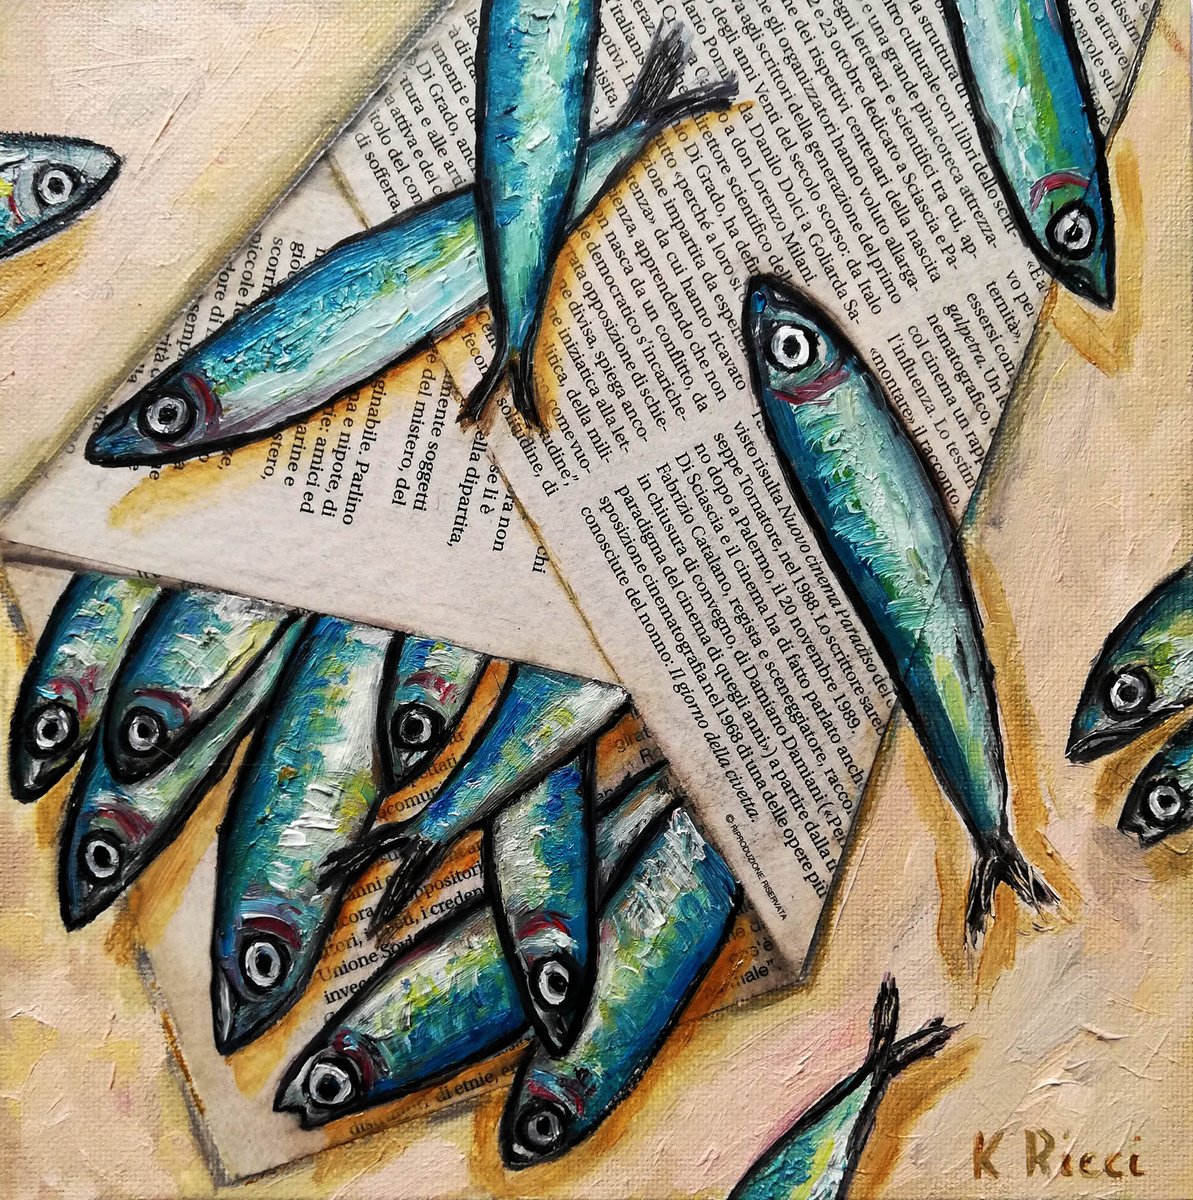 Fishes in a Bag on Newspaper Original Oil on Canvas Board Painting 8 by 8 inches (20x20... by Katia Ricci